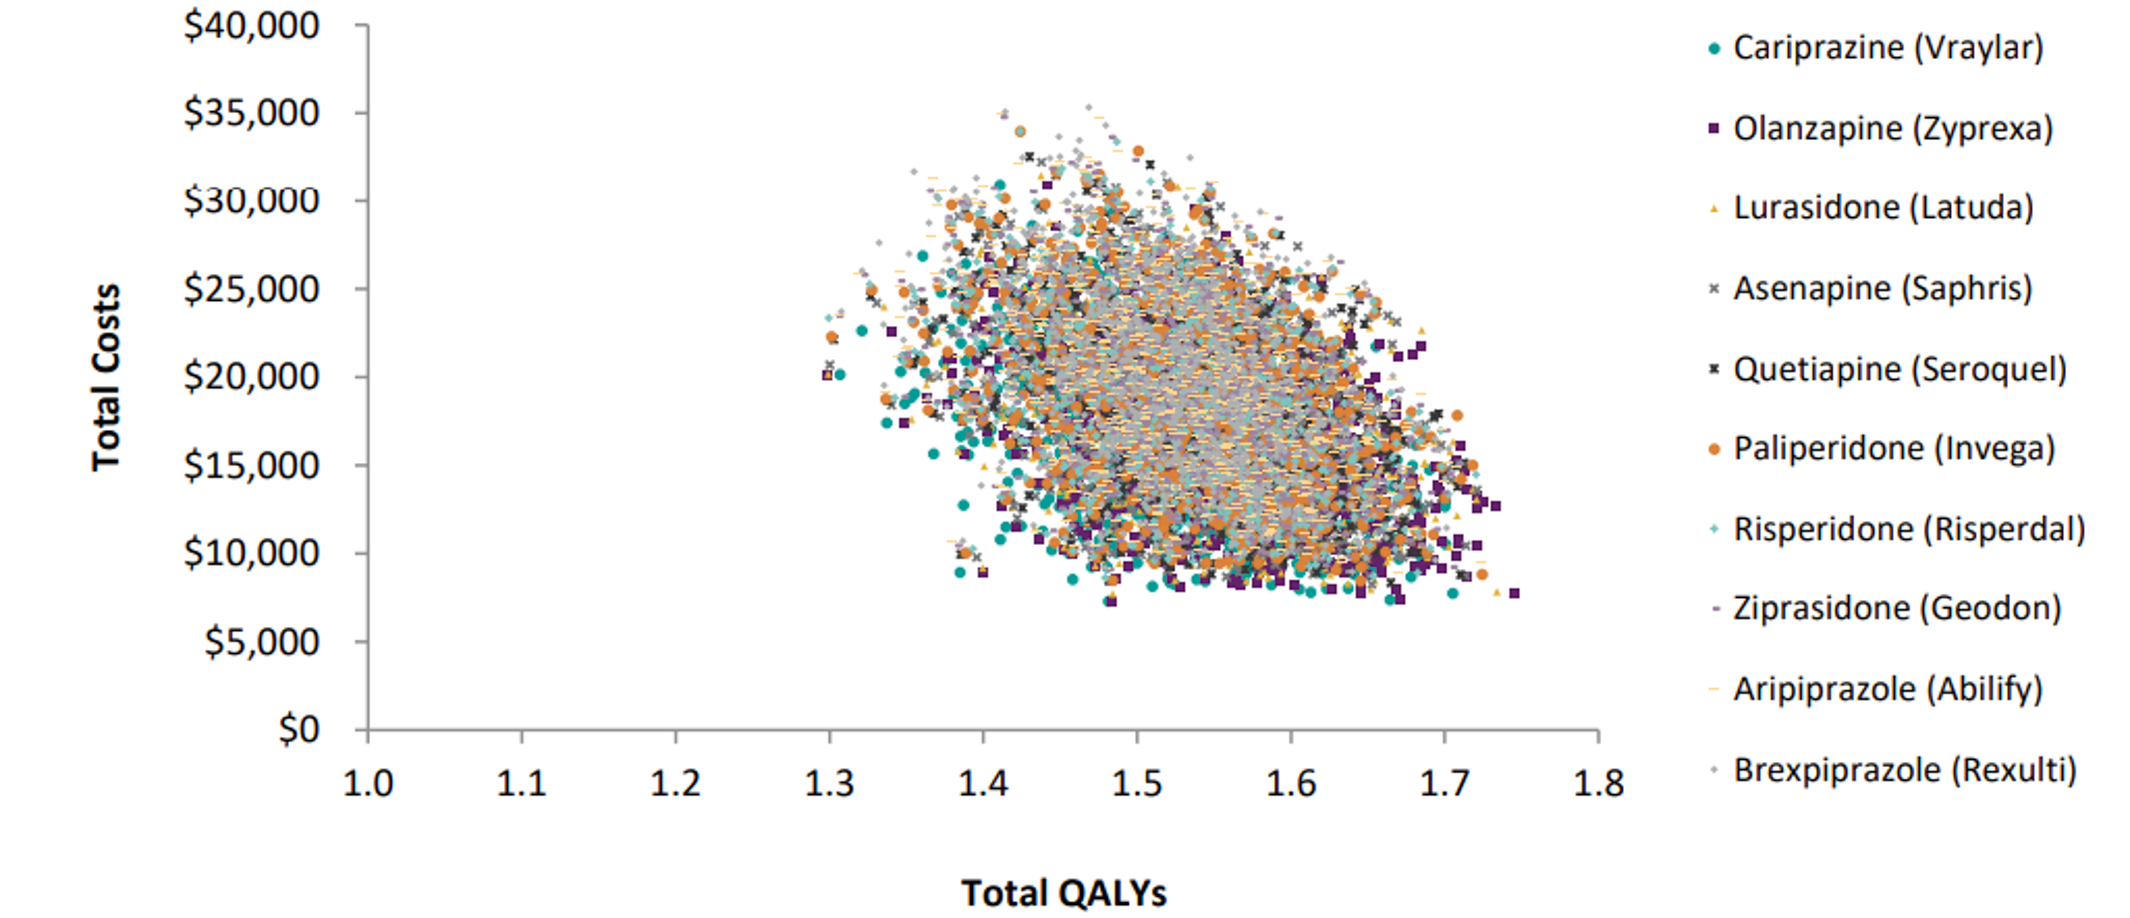 Scatterplot chart showing the probabilistic analysis and plotted costs and QALYs for each iteration and treatment. No clear distinguishing differences can be seen between treatments.